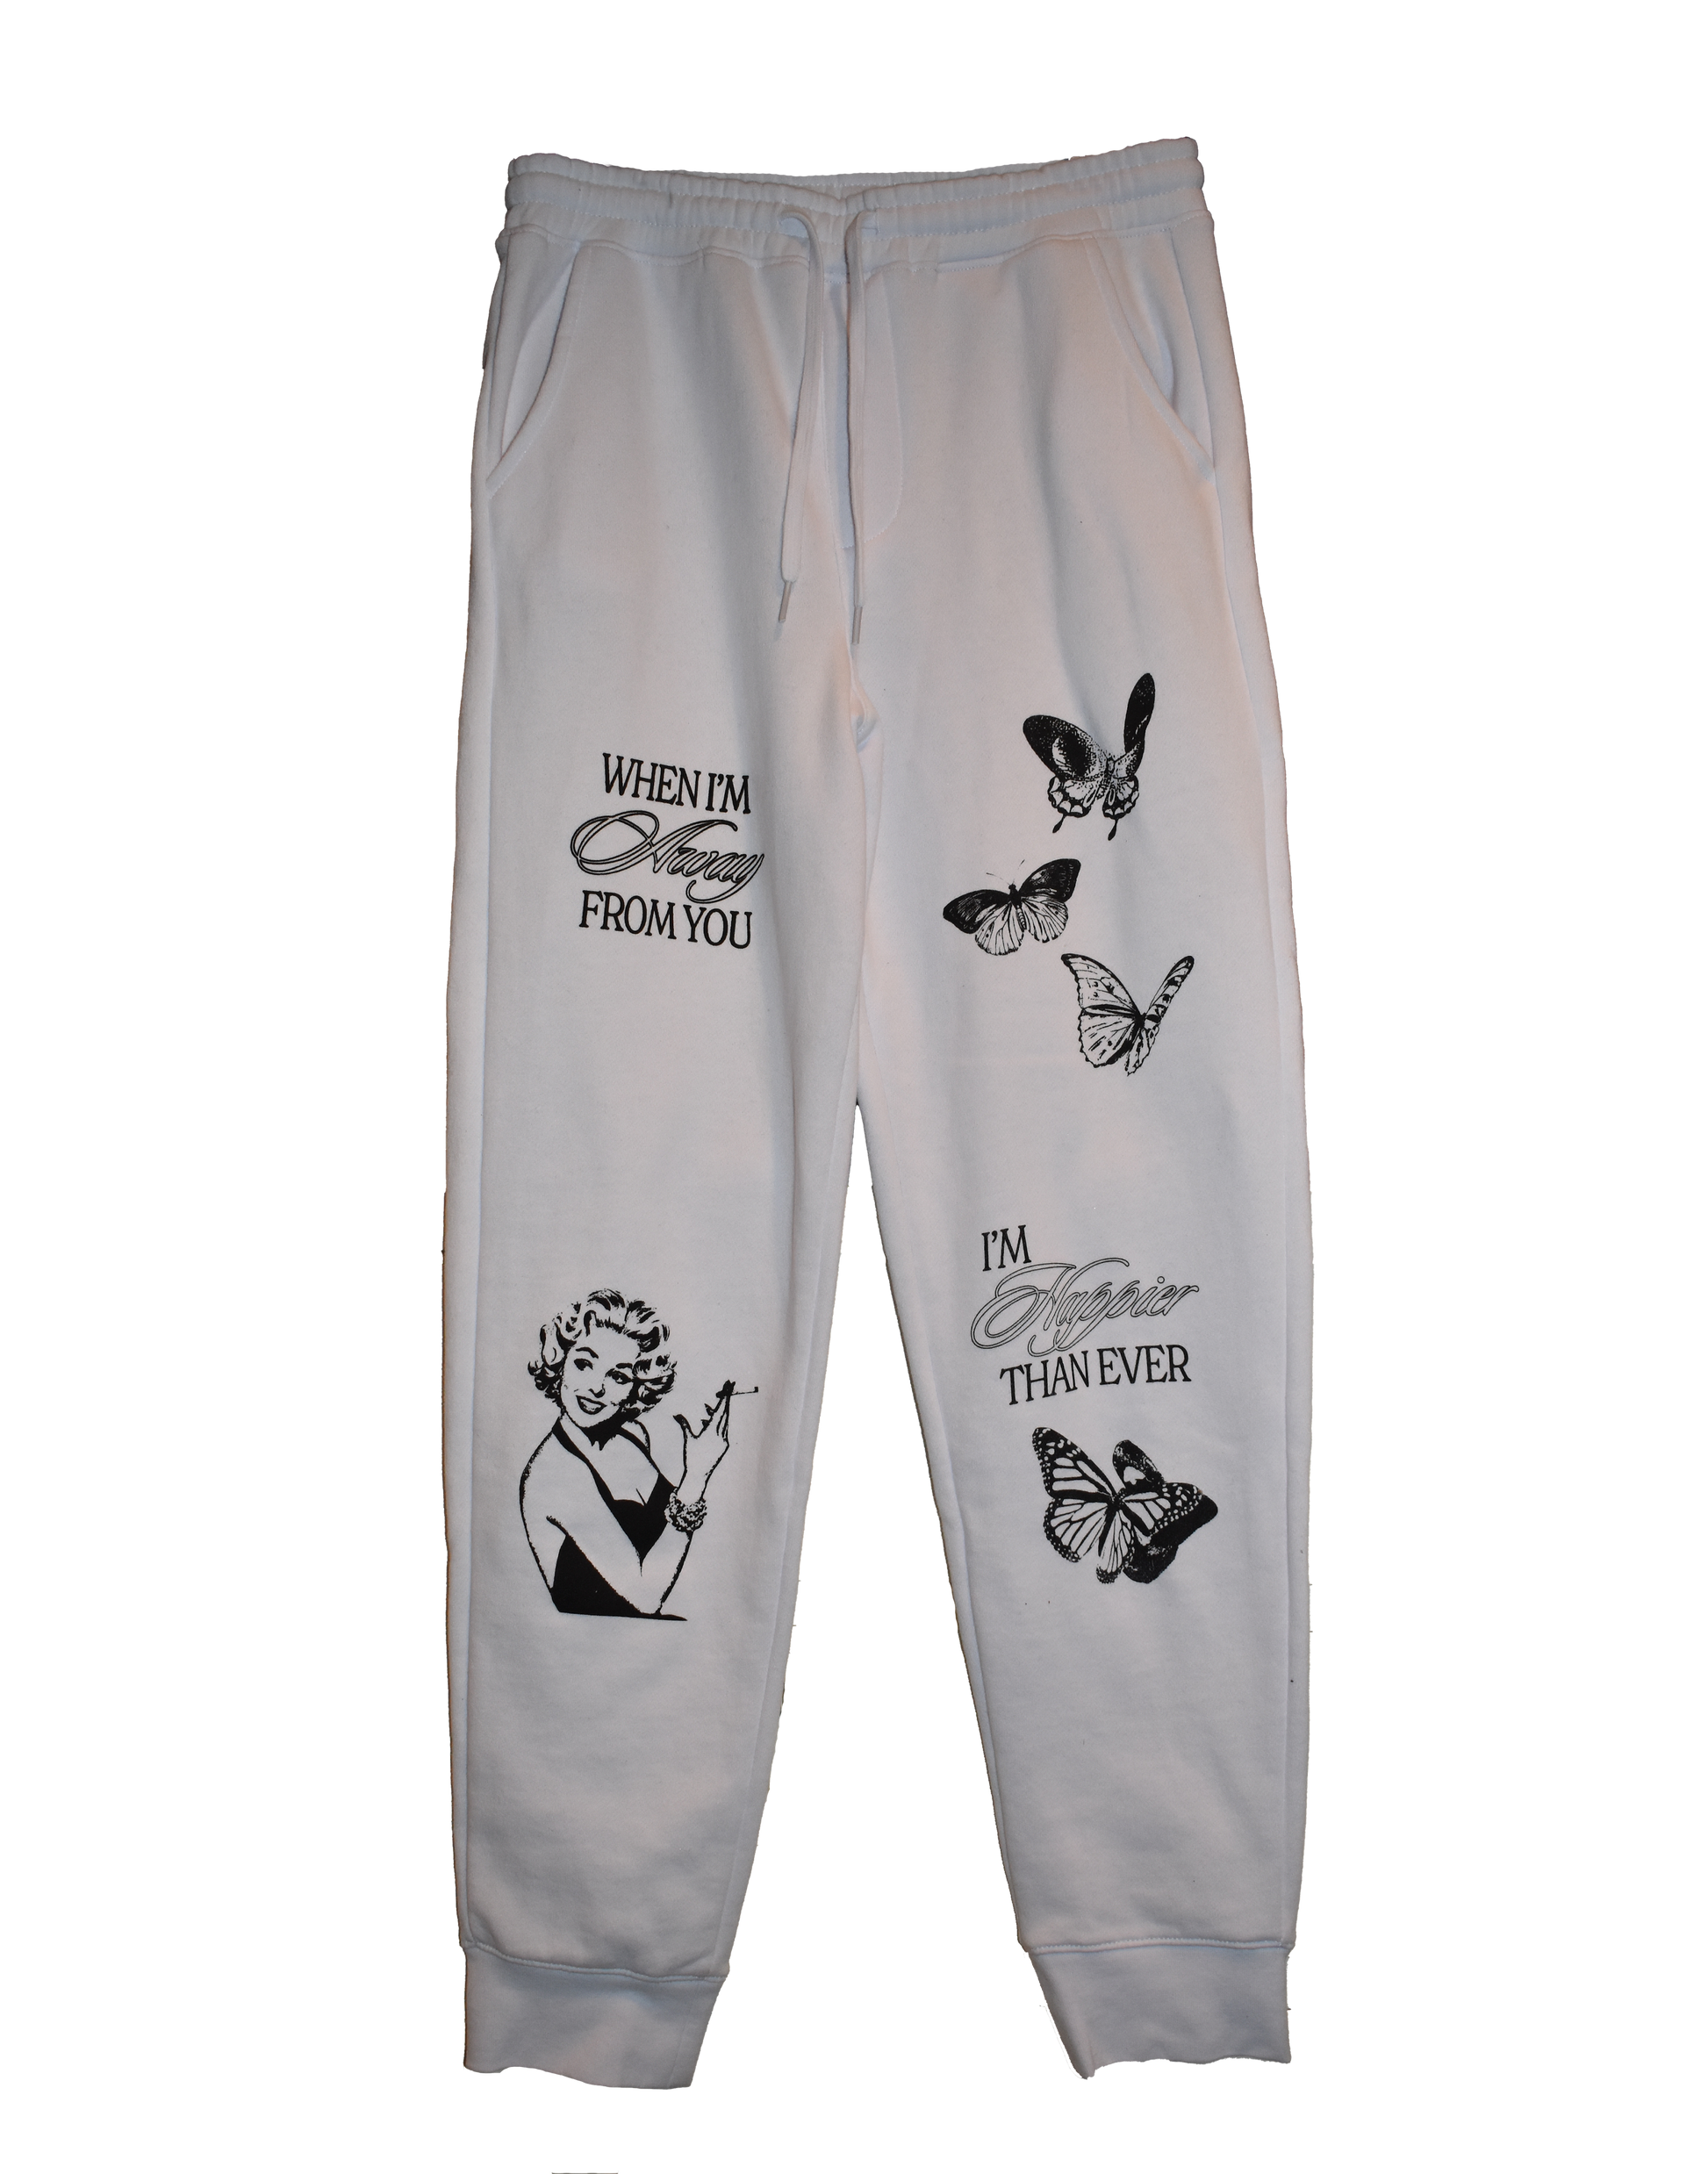 "When I'm Away From You" White Sweatpants. Best streetwear fashion API The Label